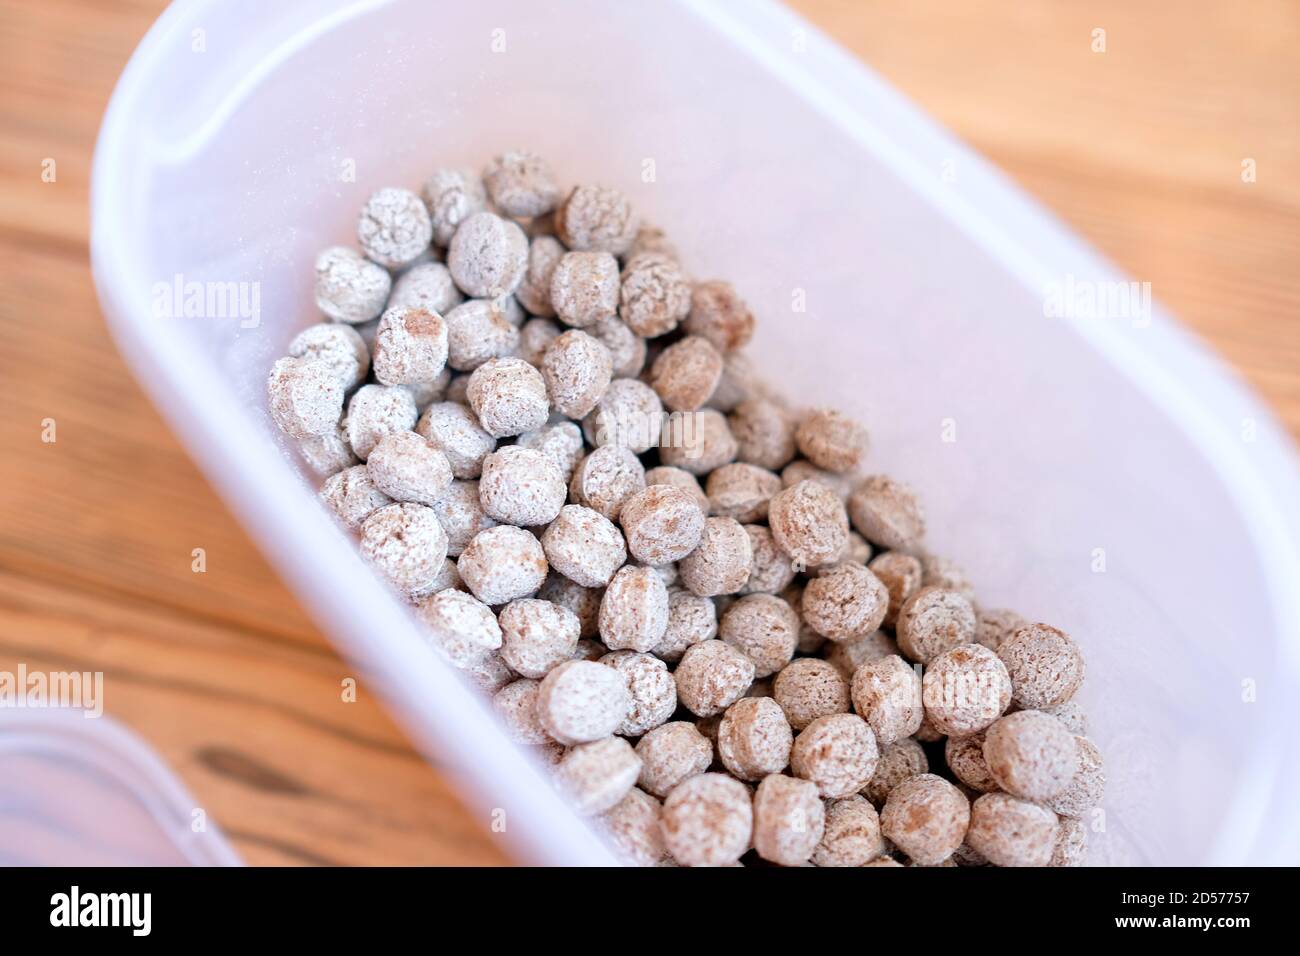 Bran in a plastic container. Dry edible balls. Wood background. Stock Photo